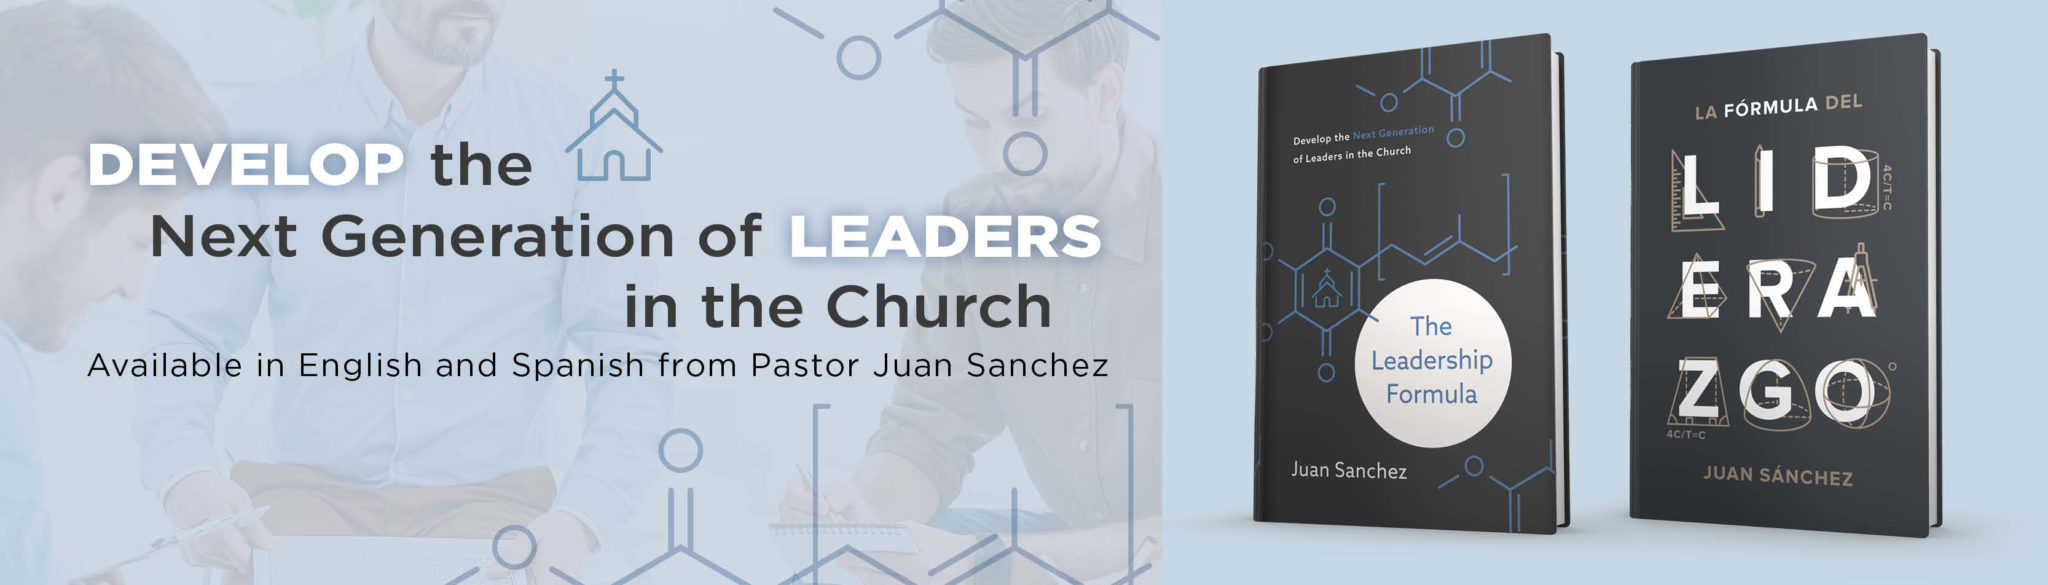 Develop the Next Generation of Leaders in the Church. Available in English & Spanish from Pastor Juan Sanchez